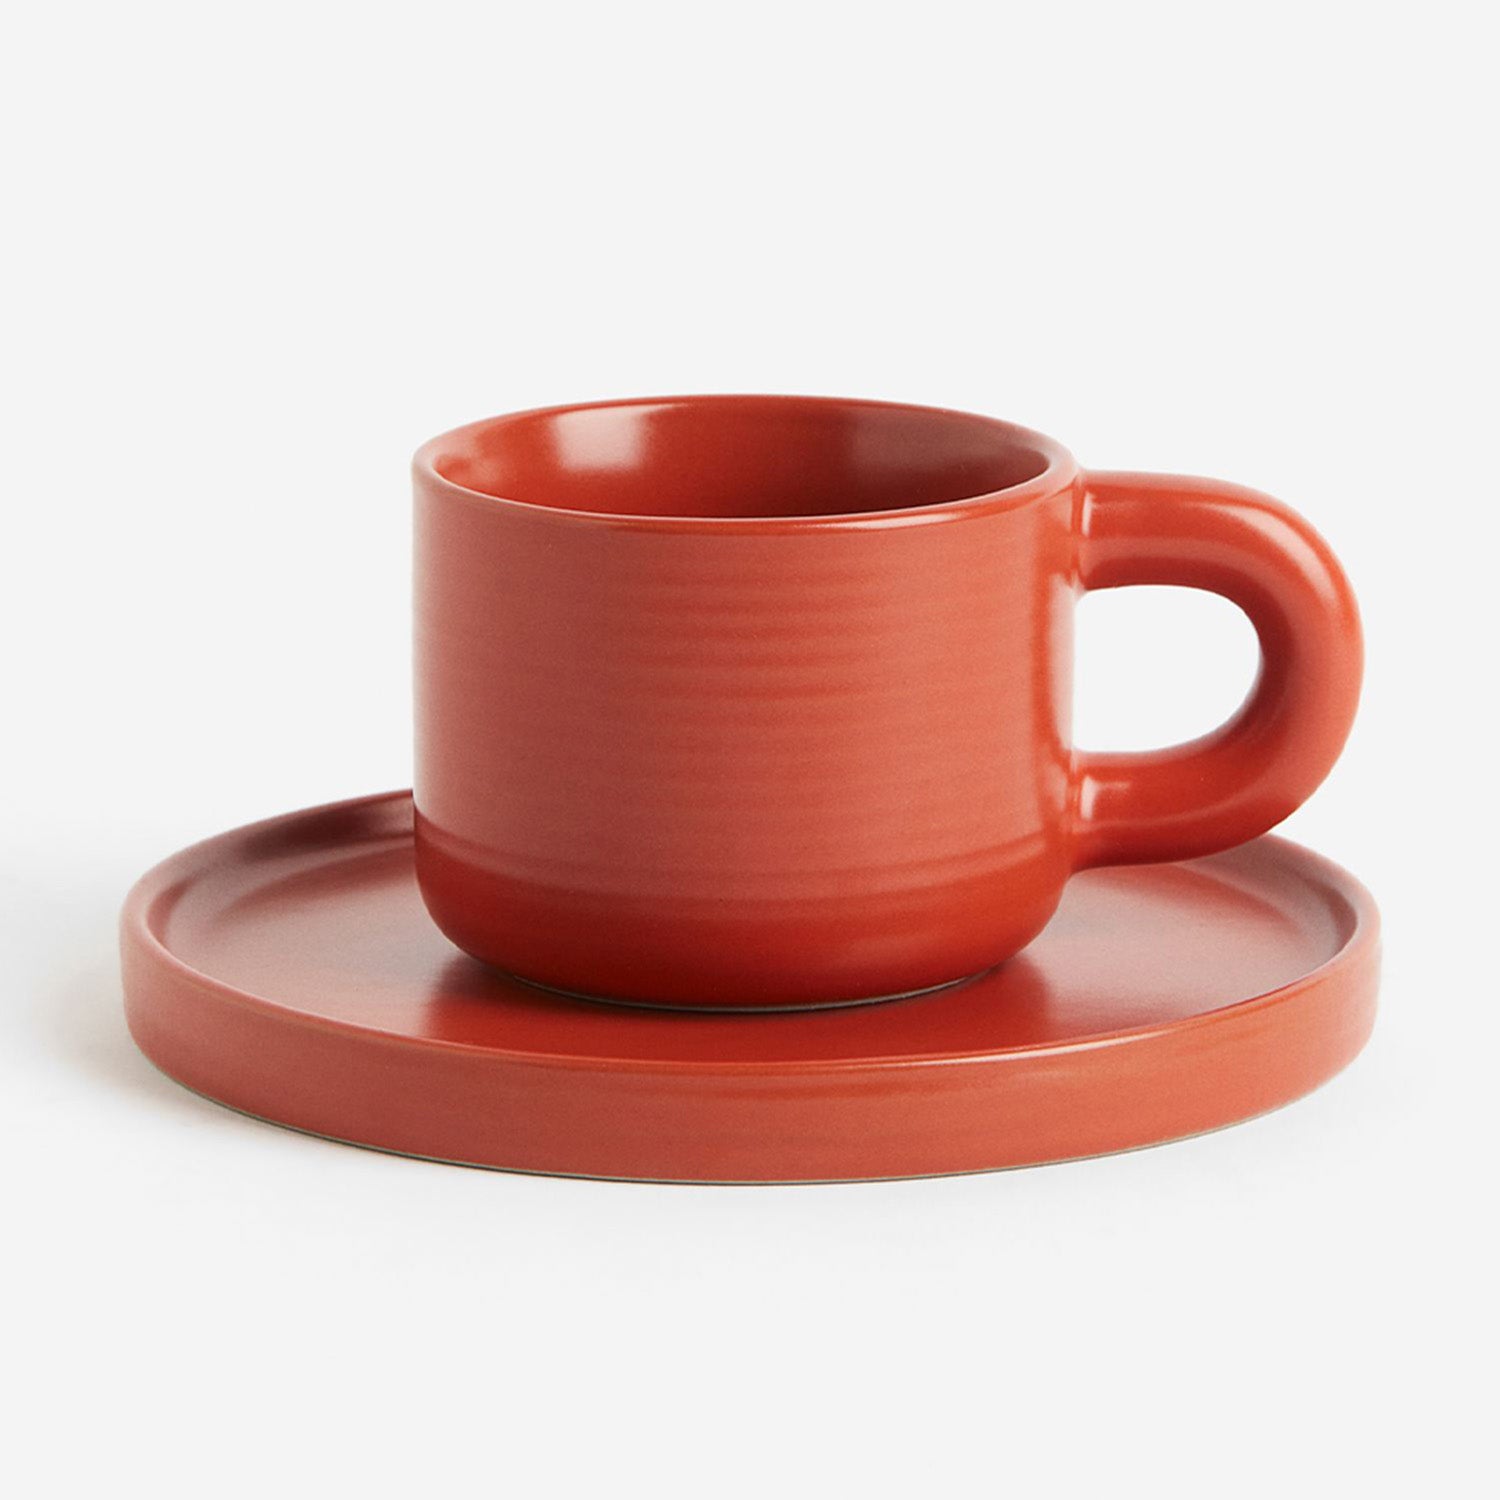 H&M Stoneware Mug and Saucer in Red